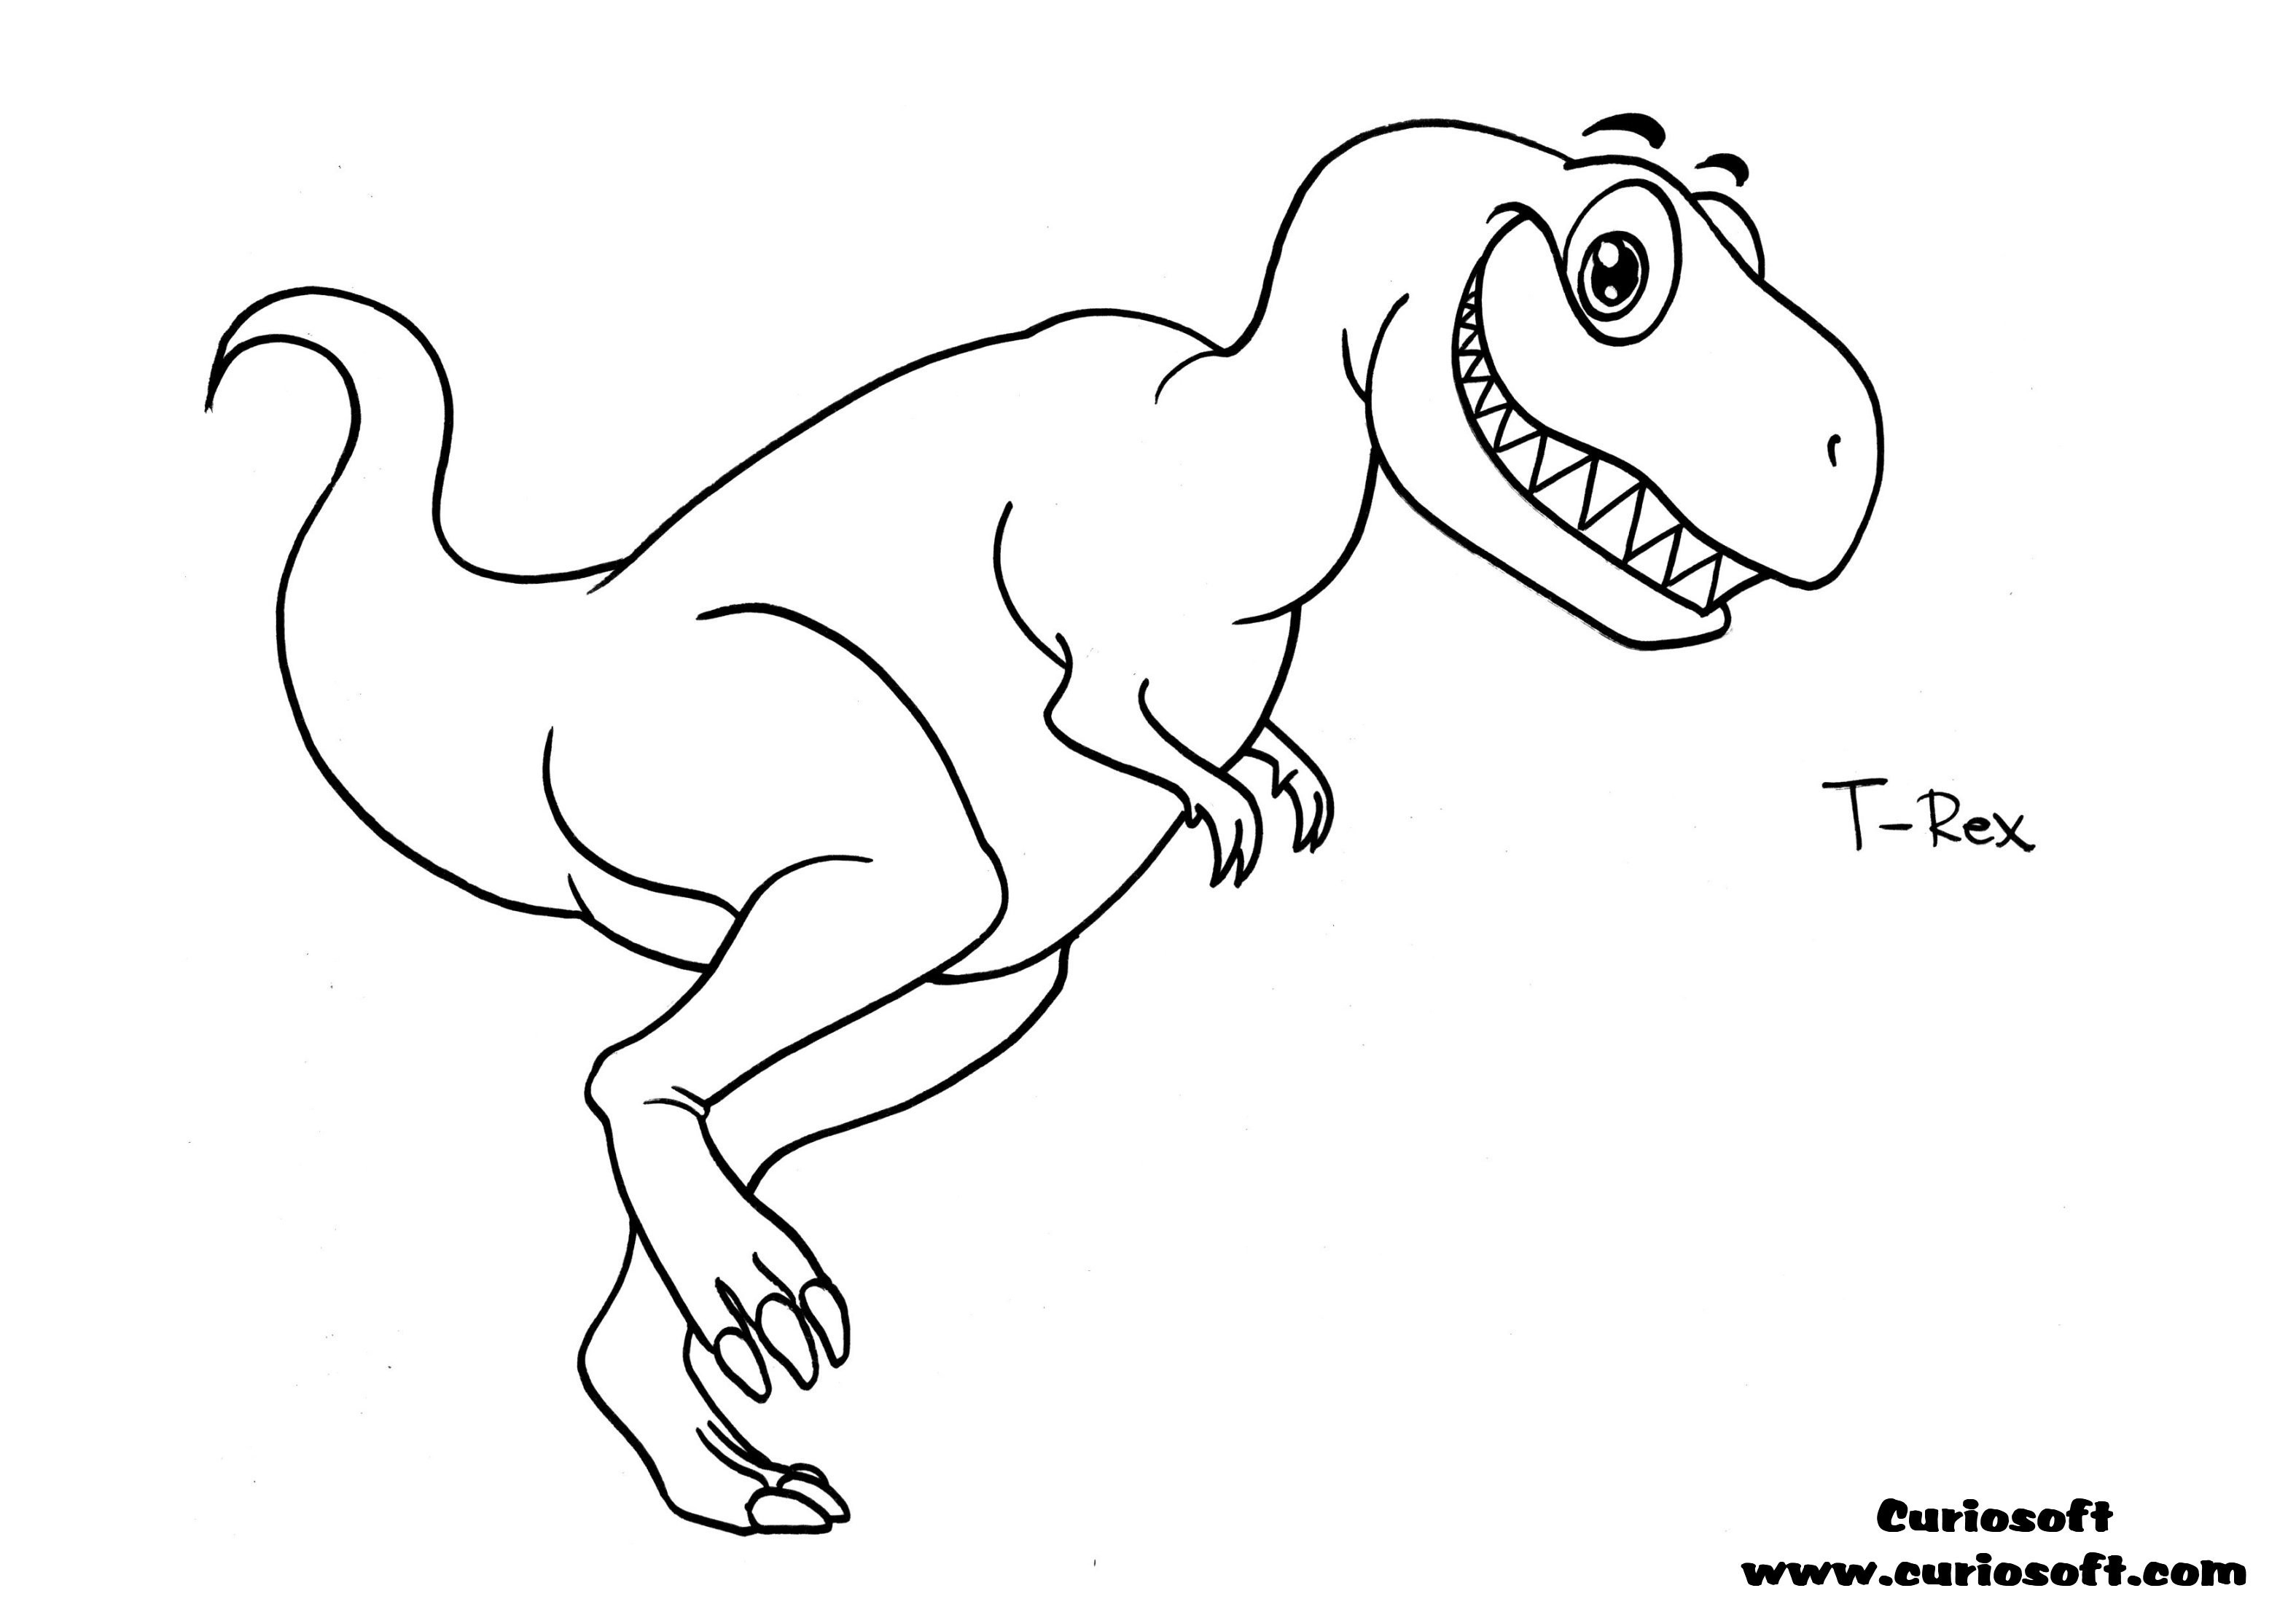 T-rex Coloring Book Pages